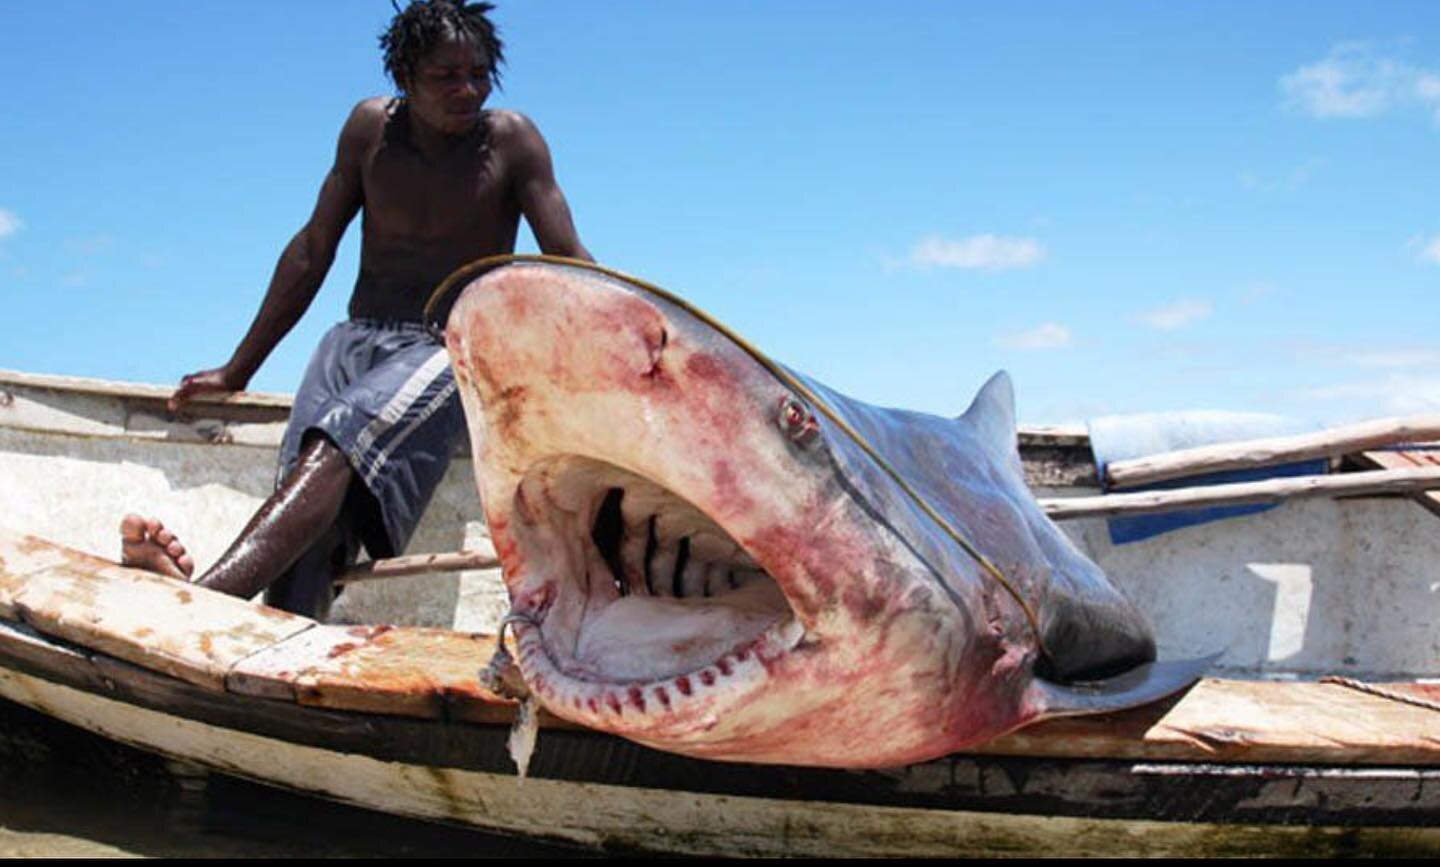 A fisherman at a remote shark fishing community in Mozambique.  Over a decade ago these fishermen used to catch between 10 and 15 sharks per day. When the team returned to document their work, this was the first shark they&rsquo;d caught in over 6 mo